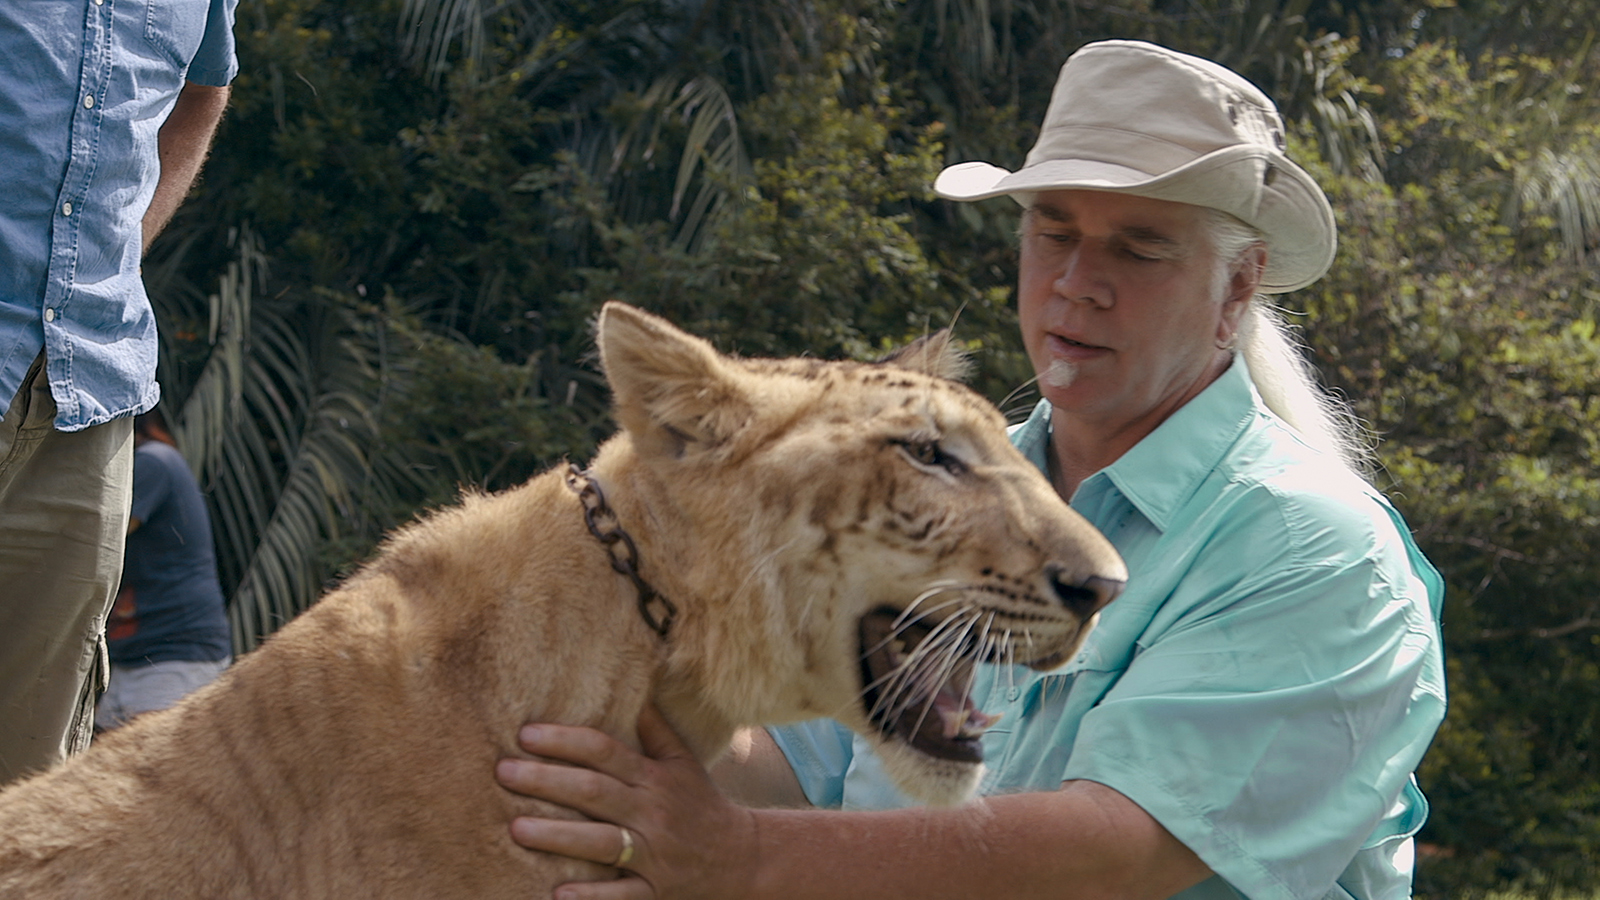 Like any documentary, 'Tiger King' takes it fair share of exaggerations. But is 'Tiger King' real at all, or just fiction? We dive into the truth.